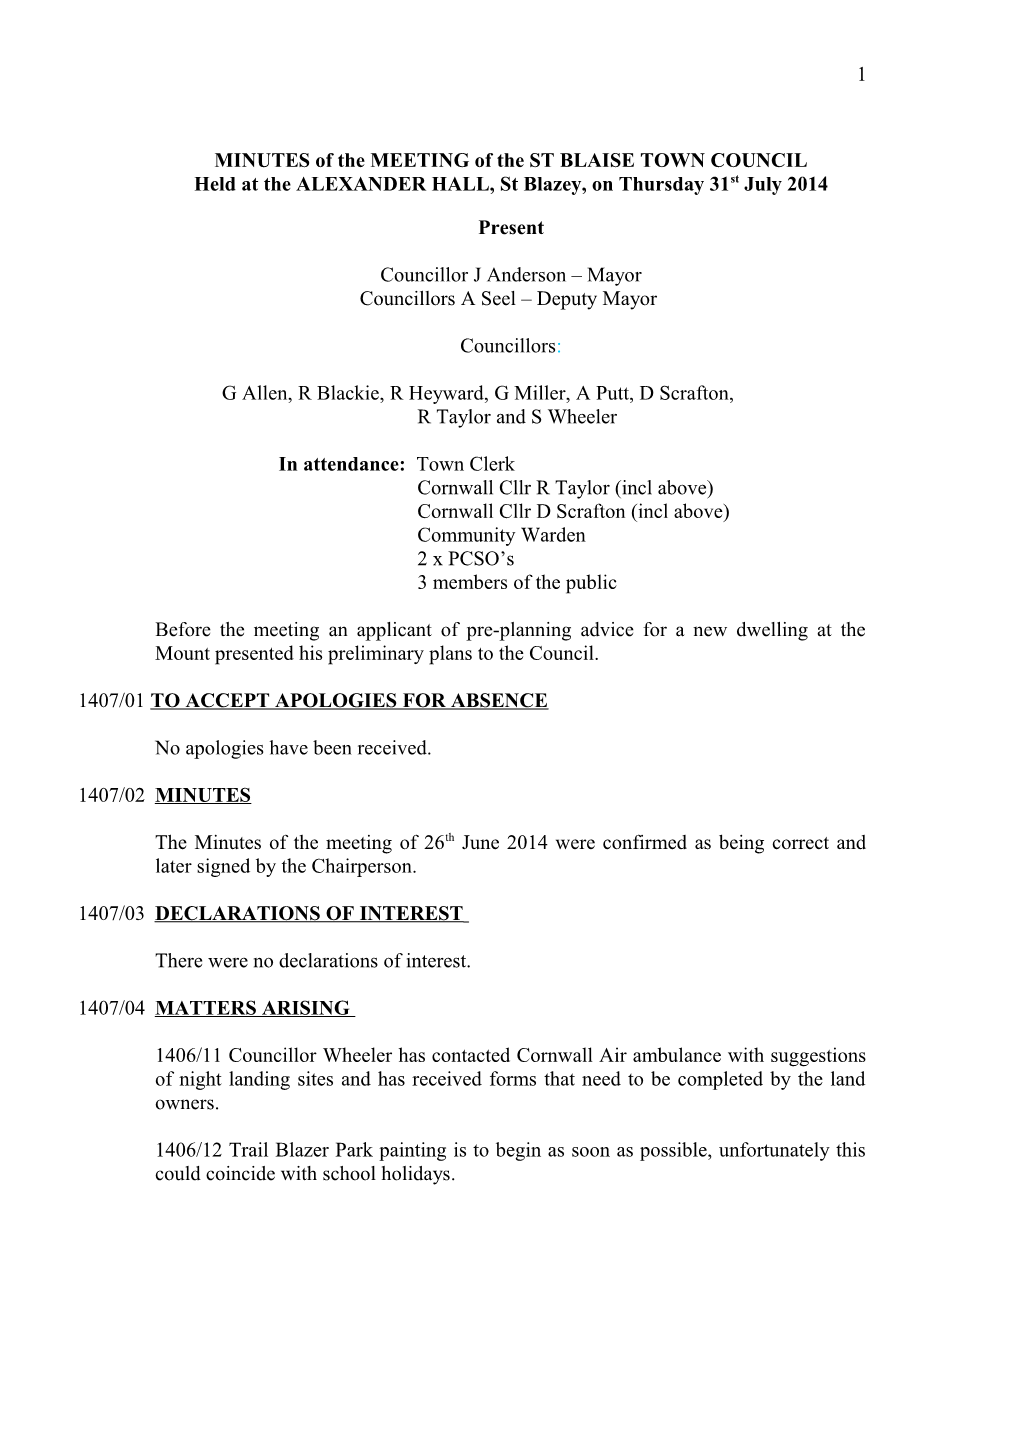 MINUTES of the MEETING of the ST BLAISE TOWN COUNCIL s3